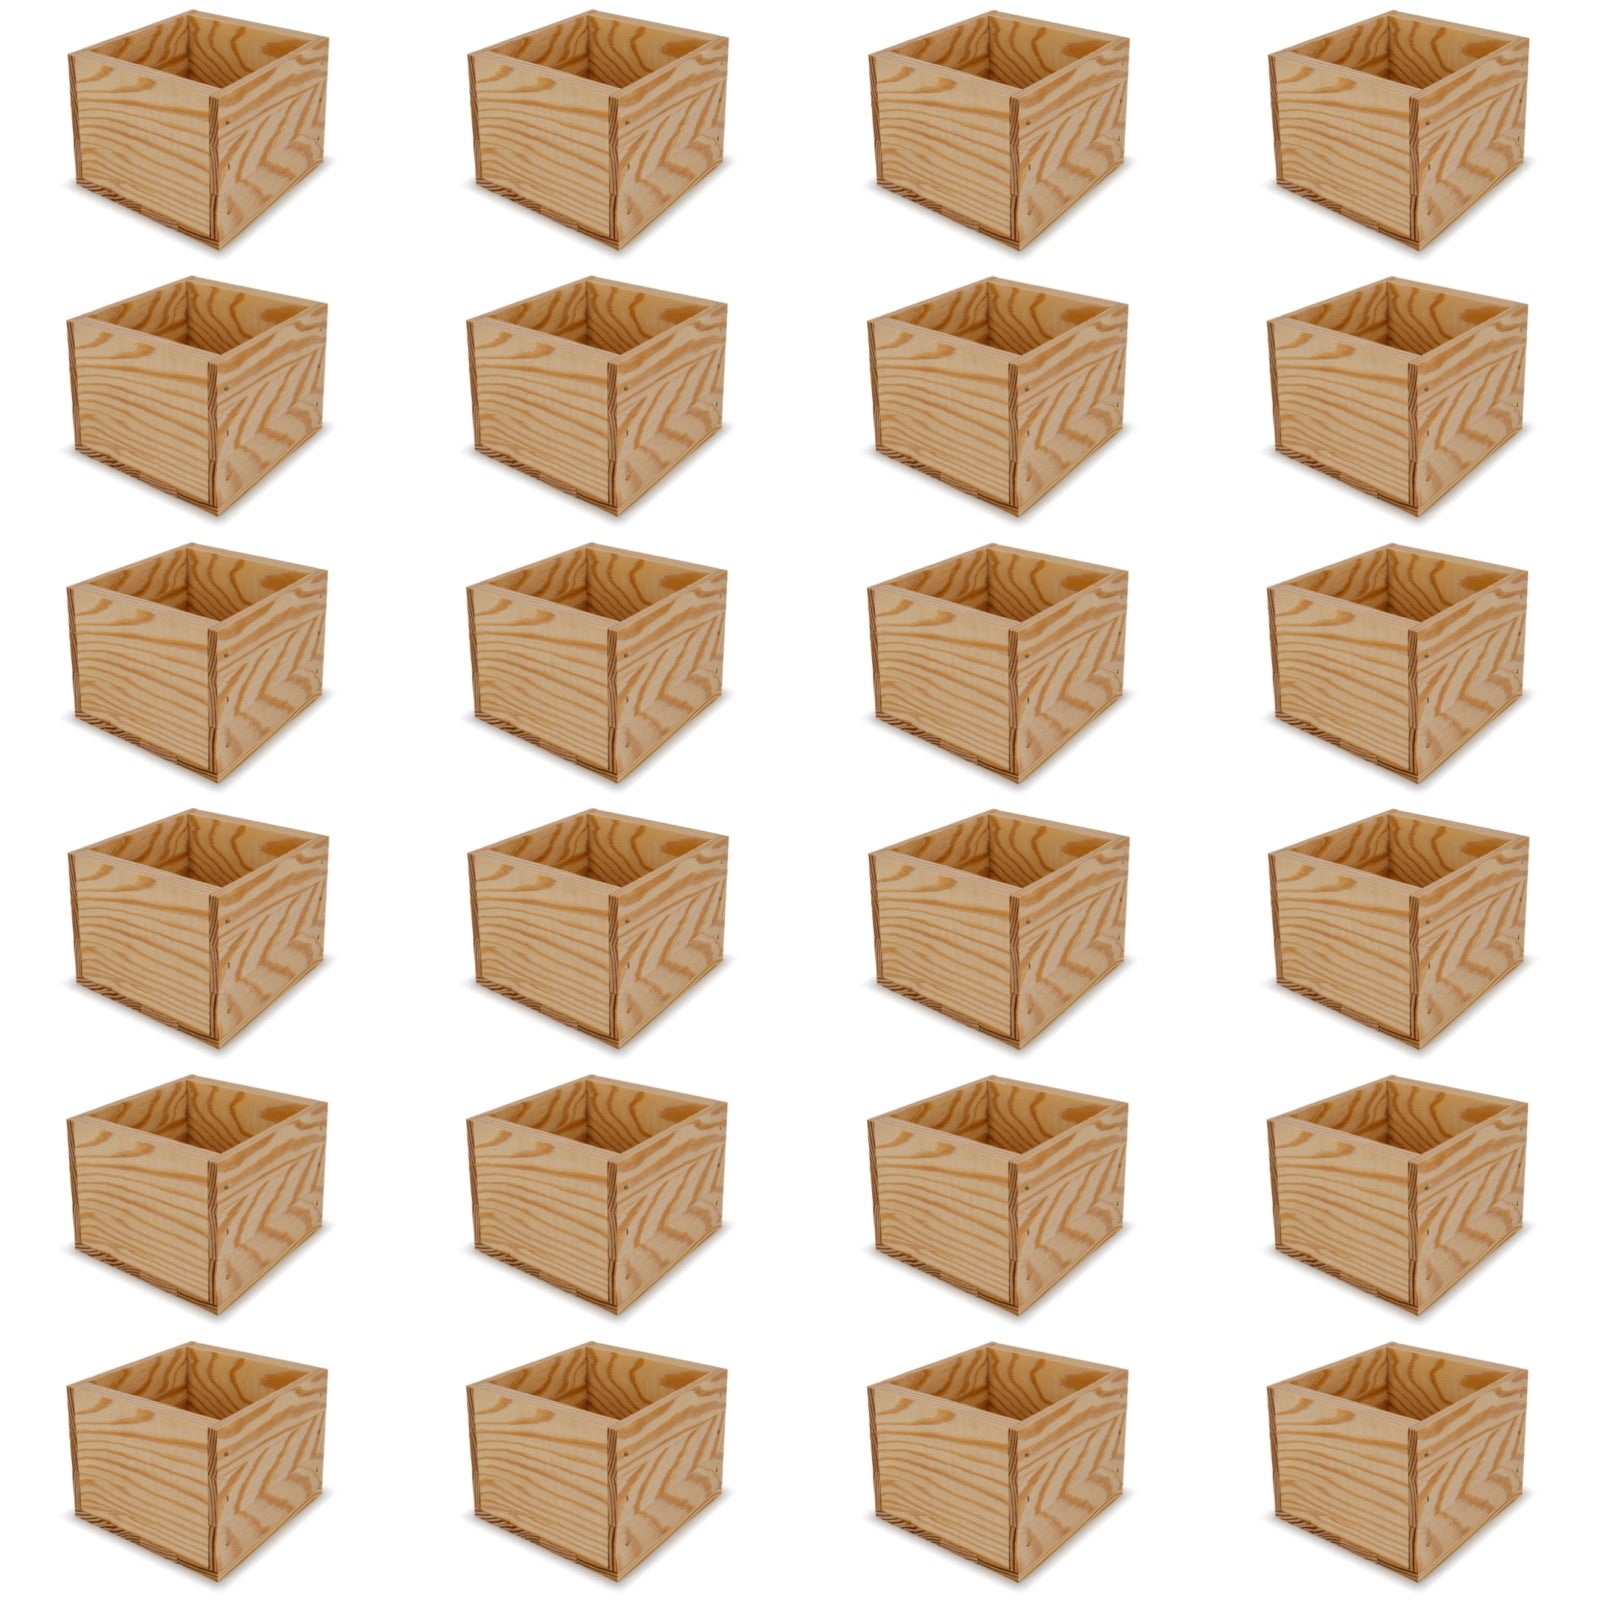 24 Small wooden crates 6x6.25x5.25